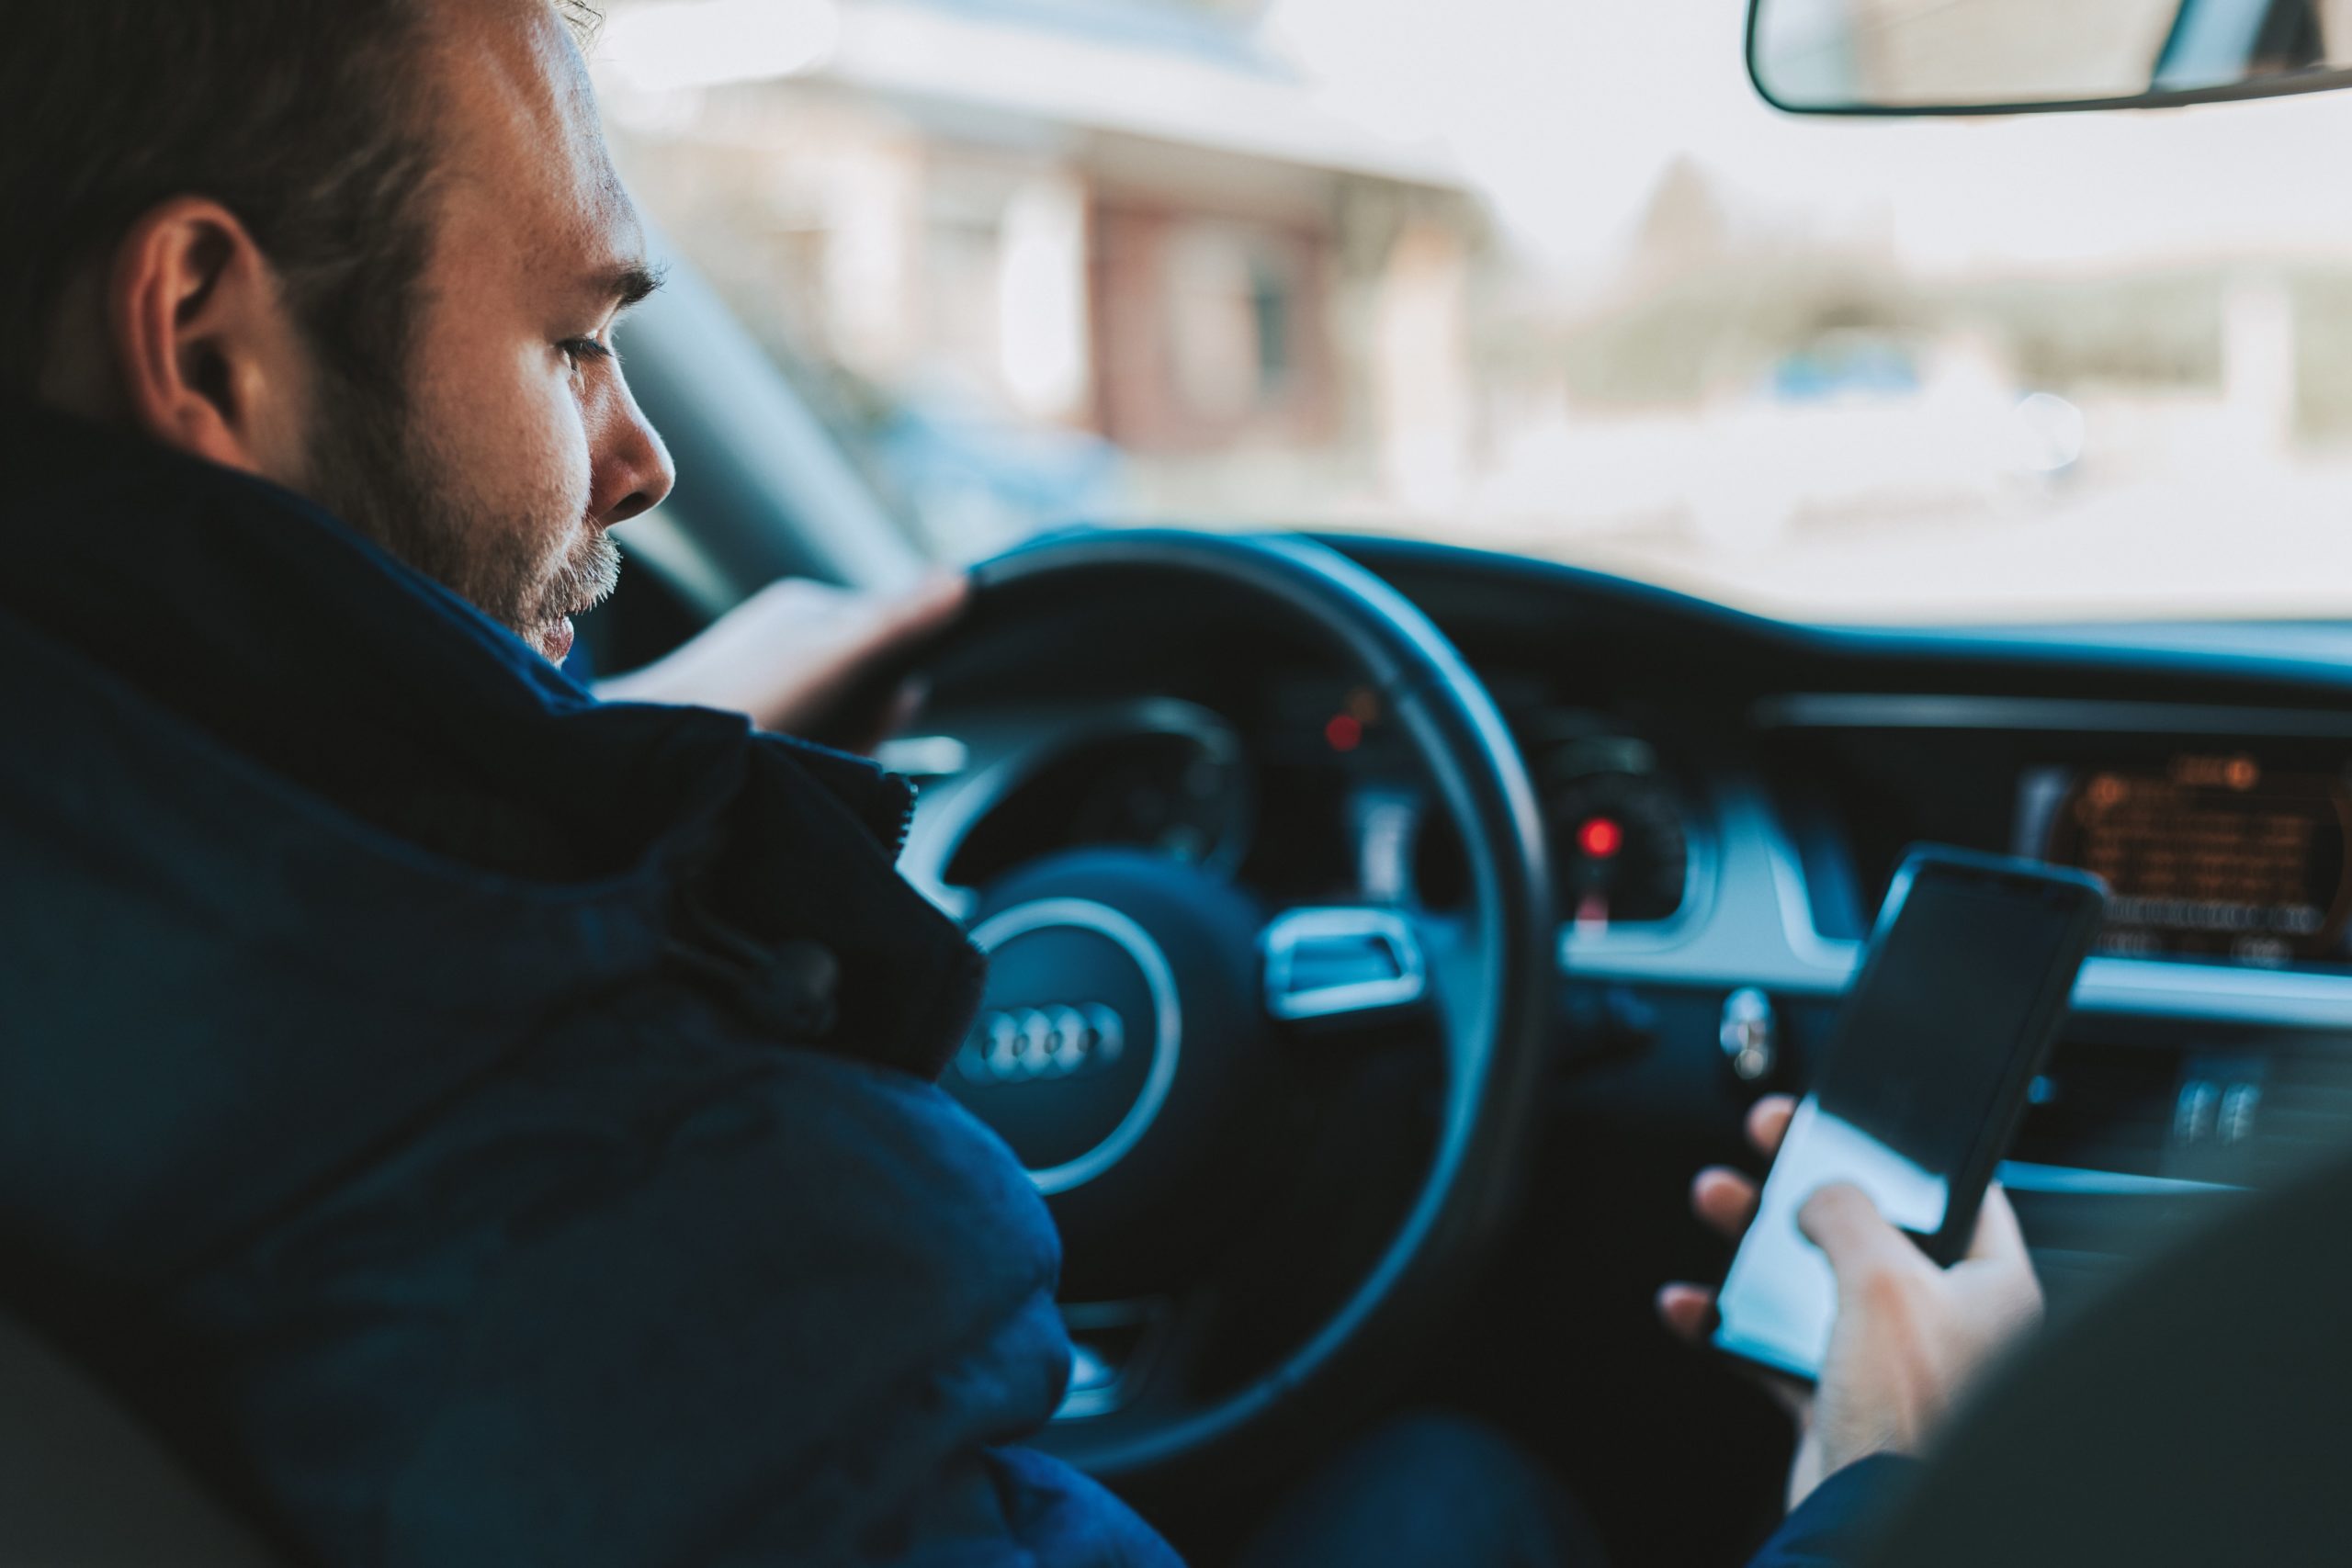 why is texting and driving dangerous essay